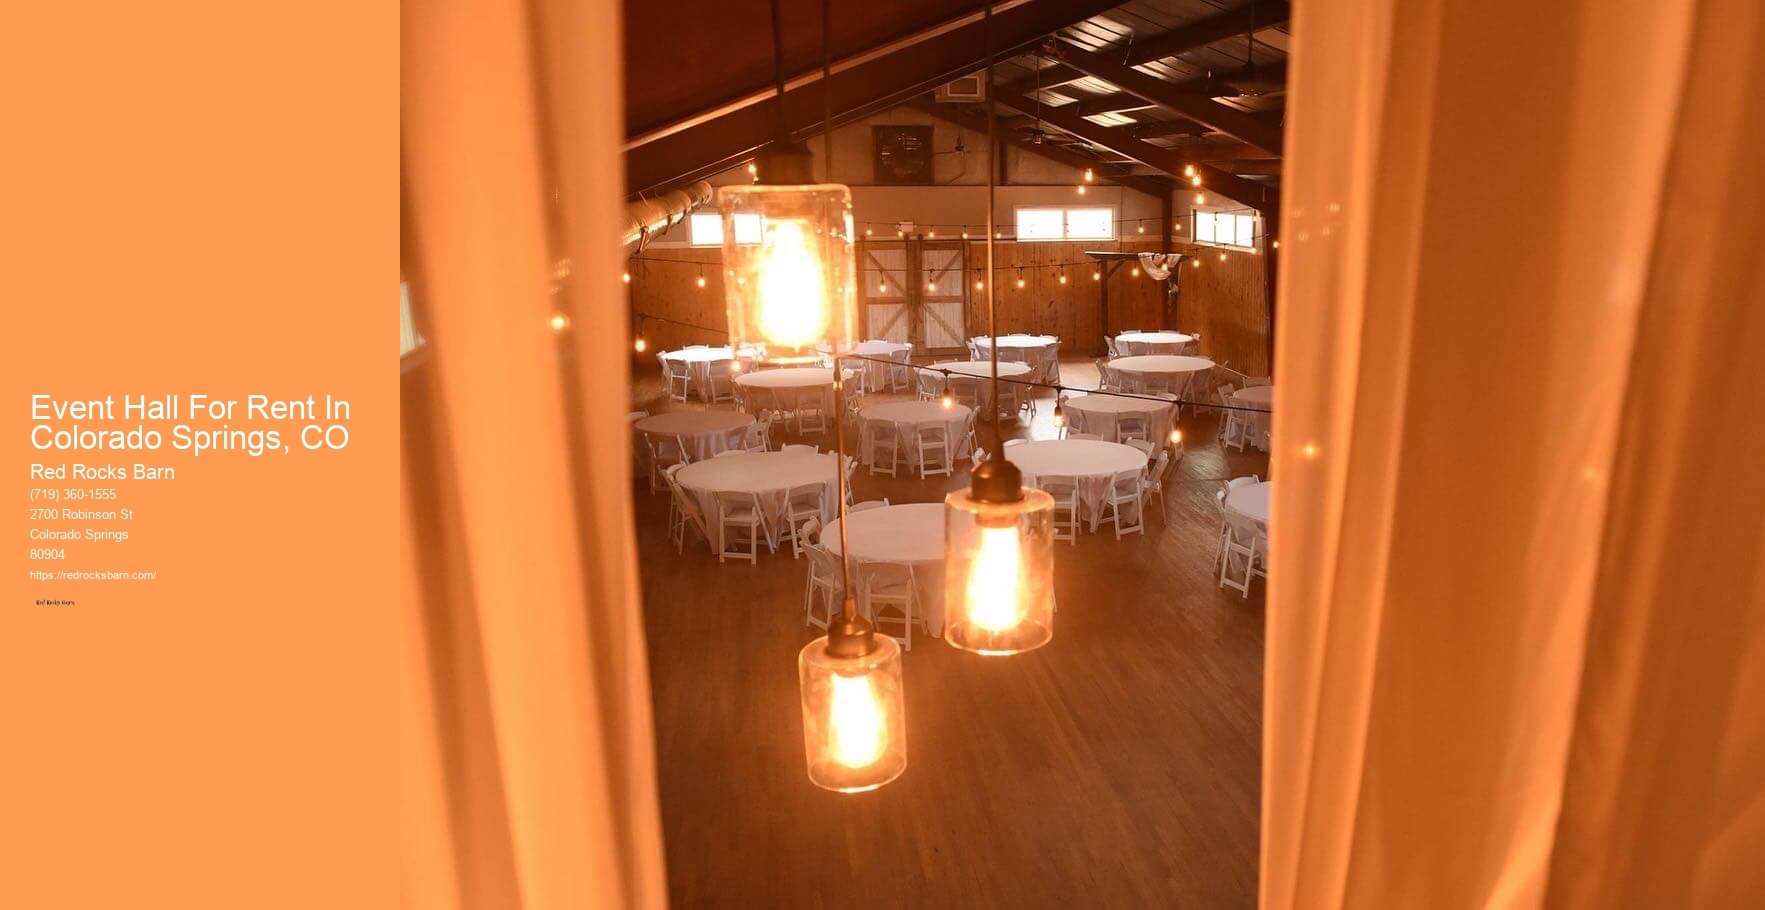 Event Hall For Rent In Colorado Springs, CO